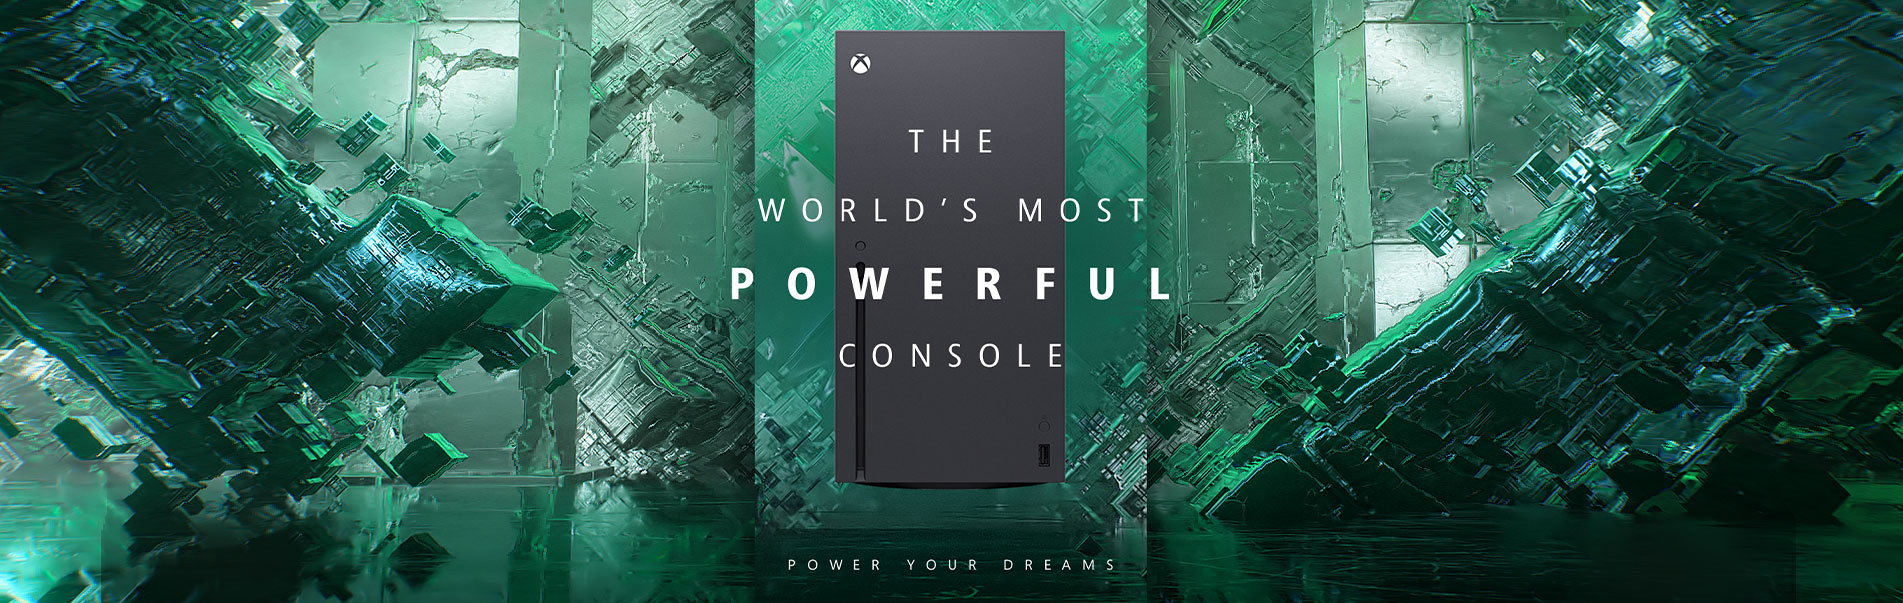 the most powerful console in the world